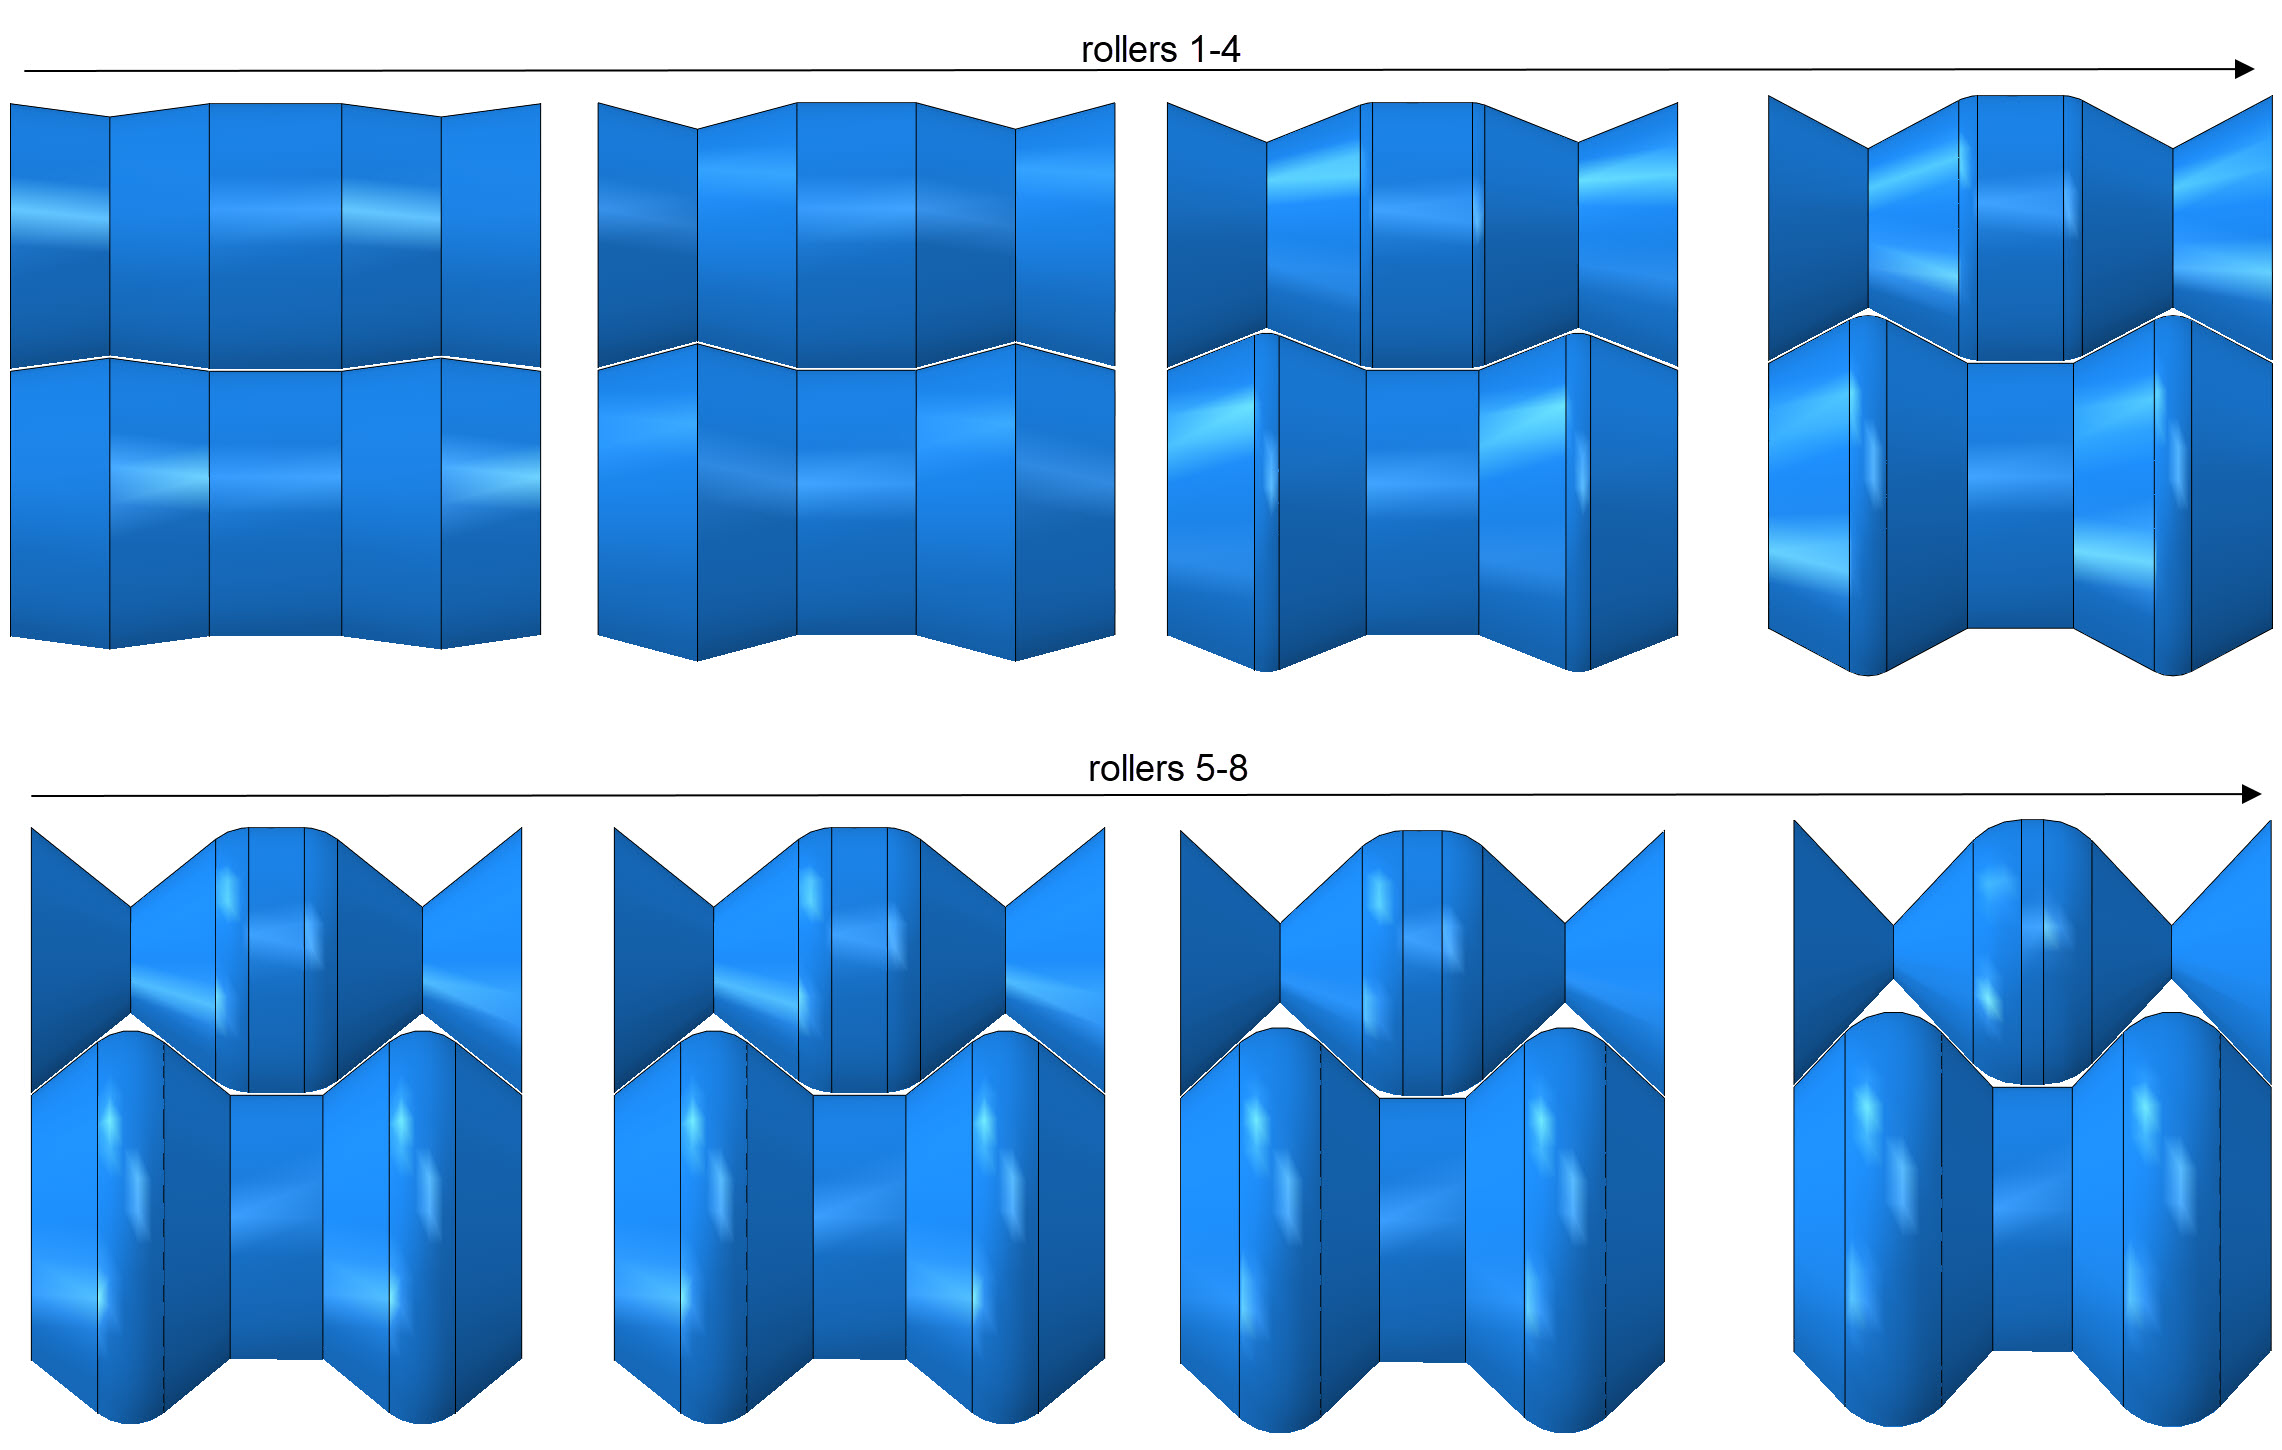 rollers for roll forming process in Abaqus